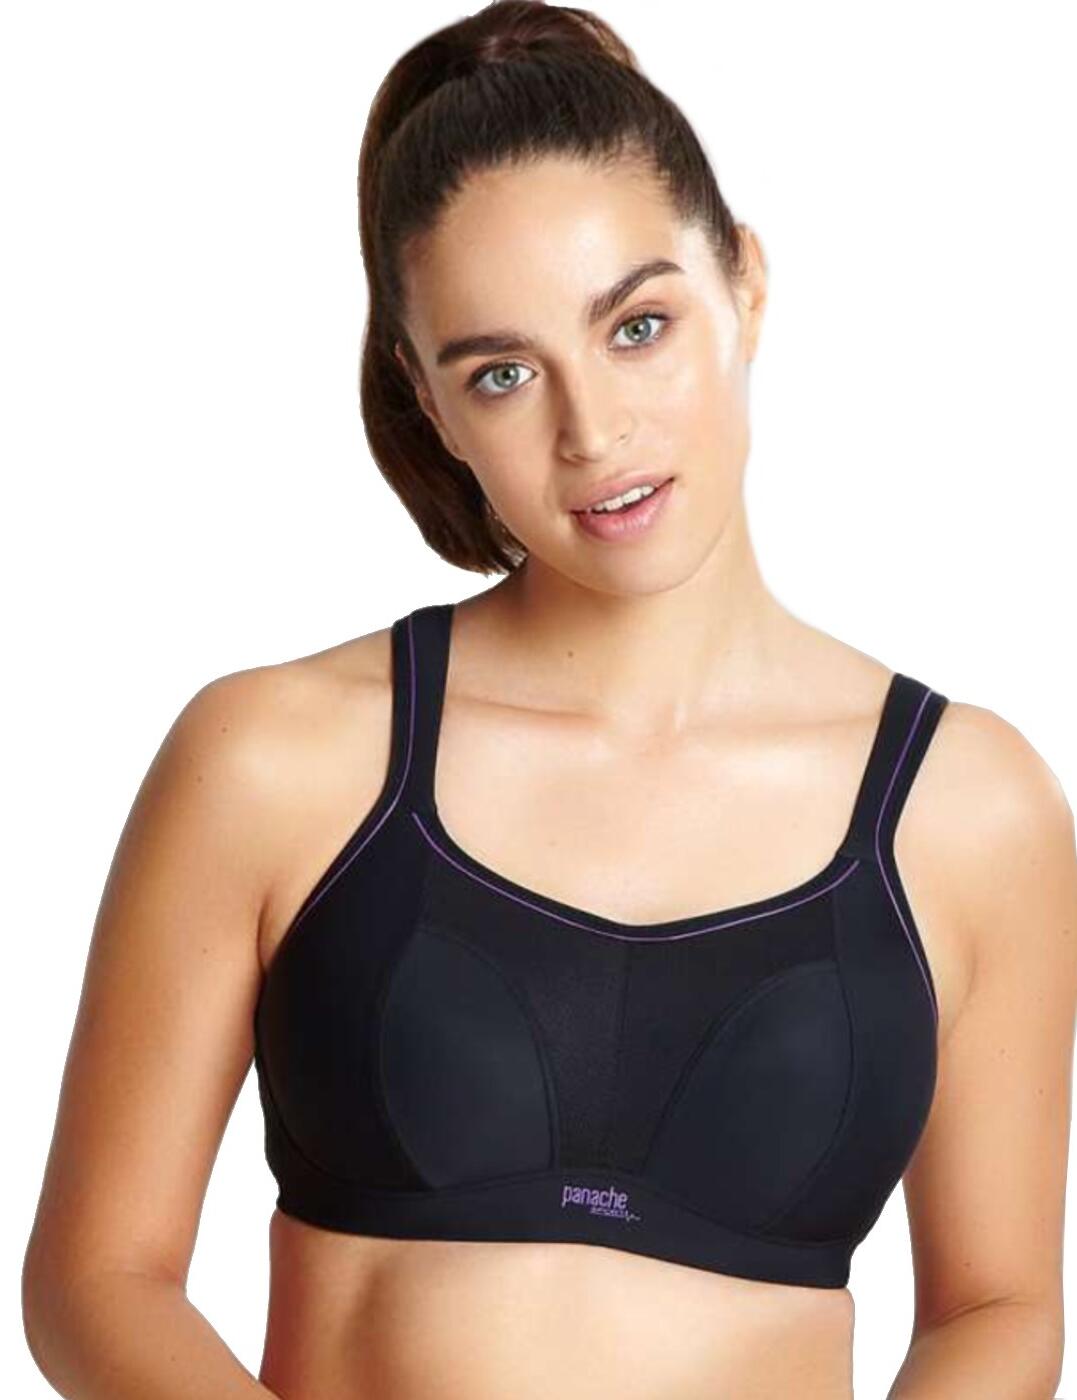 Panache Sports Bra 7341A Non-Wired Moulded Padded High Impact Sports Bras 